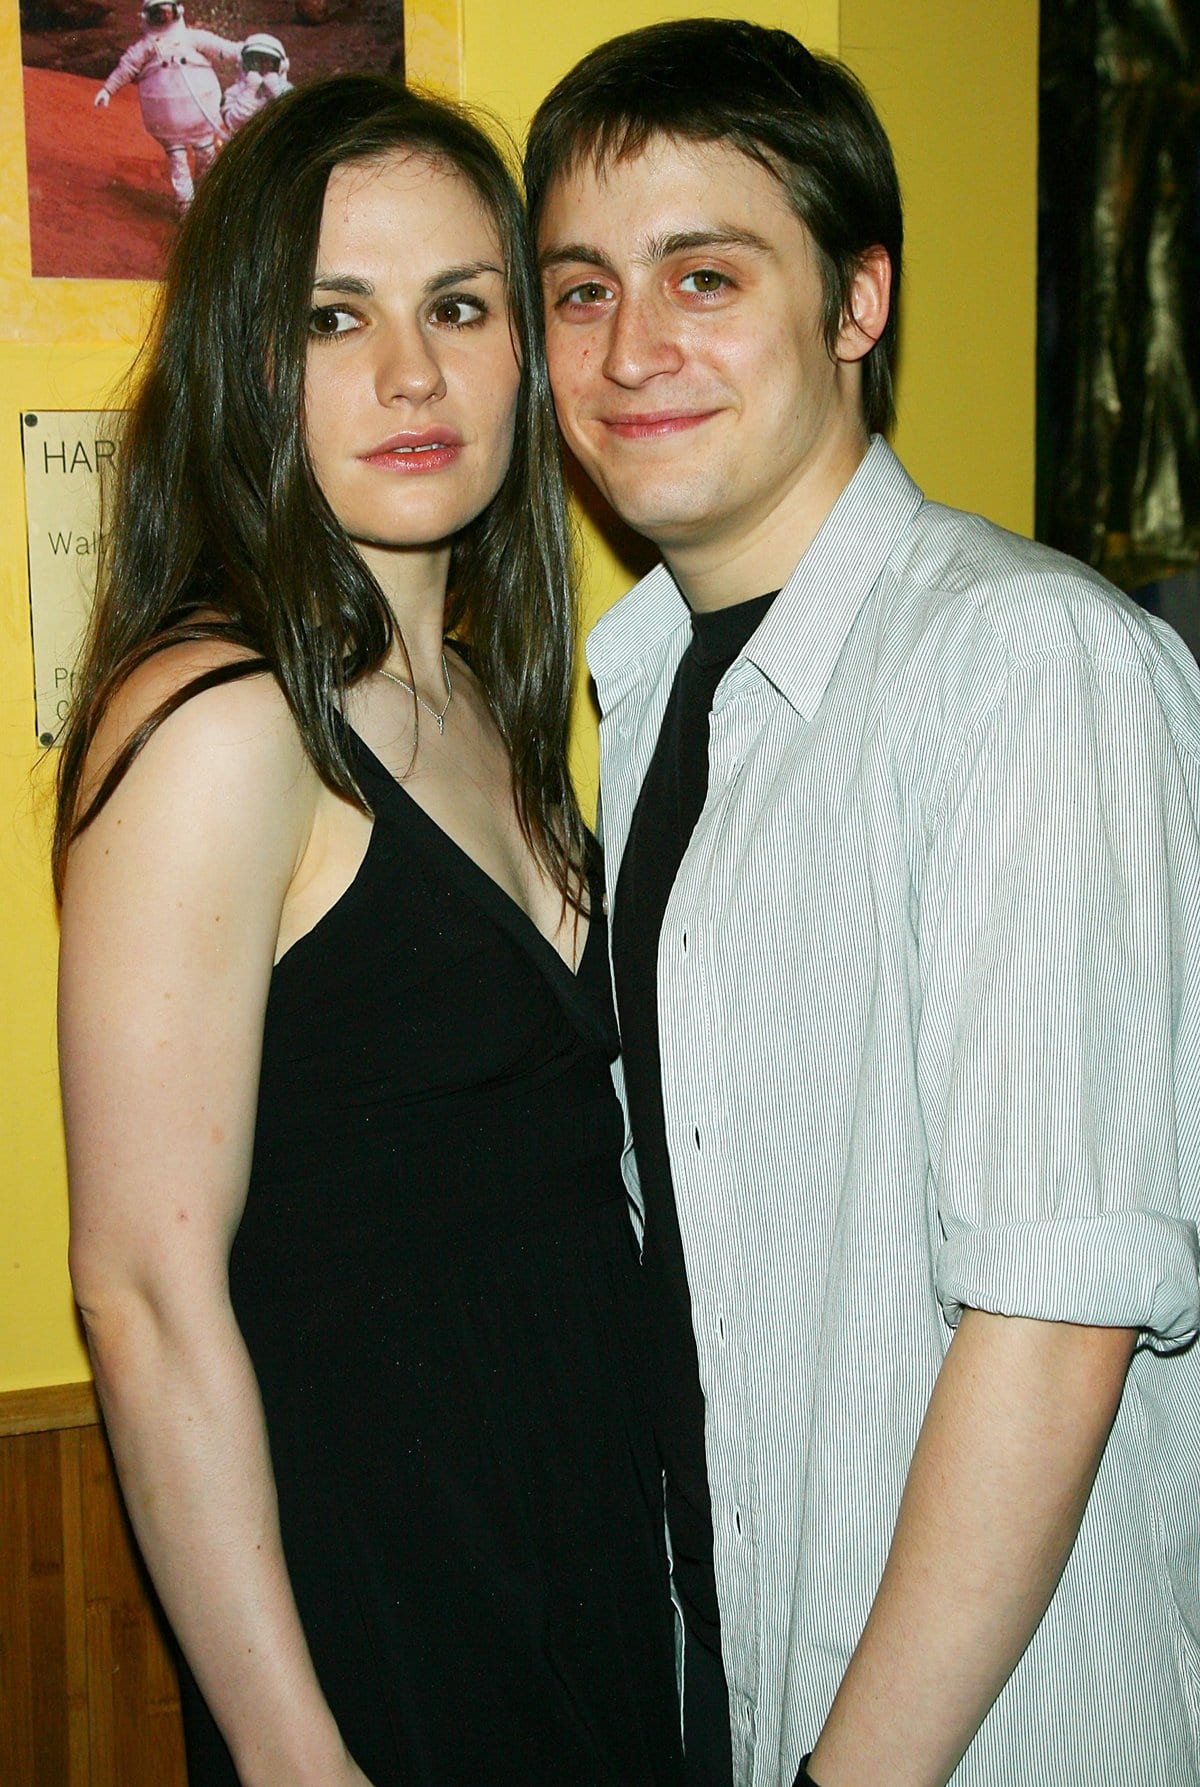 Anna Paquin and Kieran Culkin met while starring in an Off-Broadway production and dated from 2005 to 2006